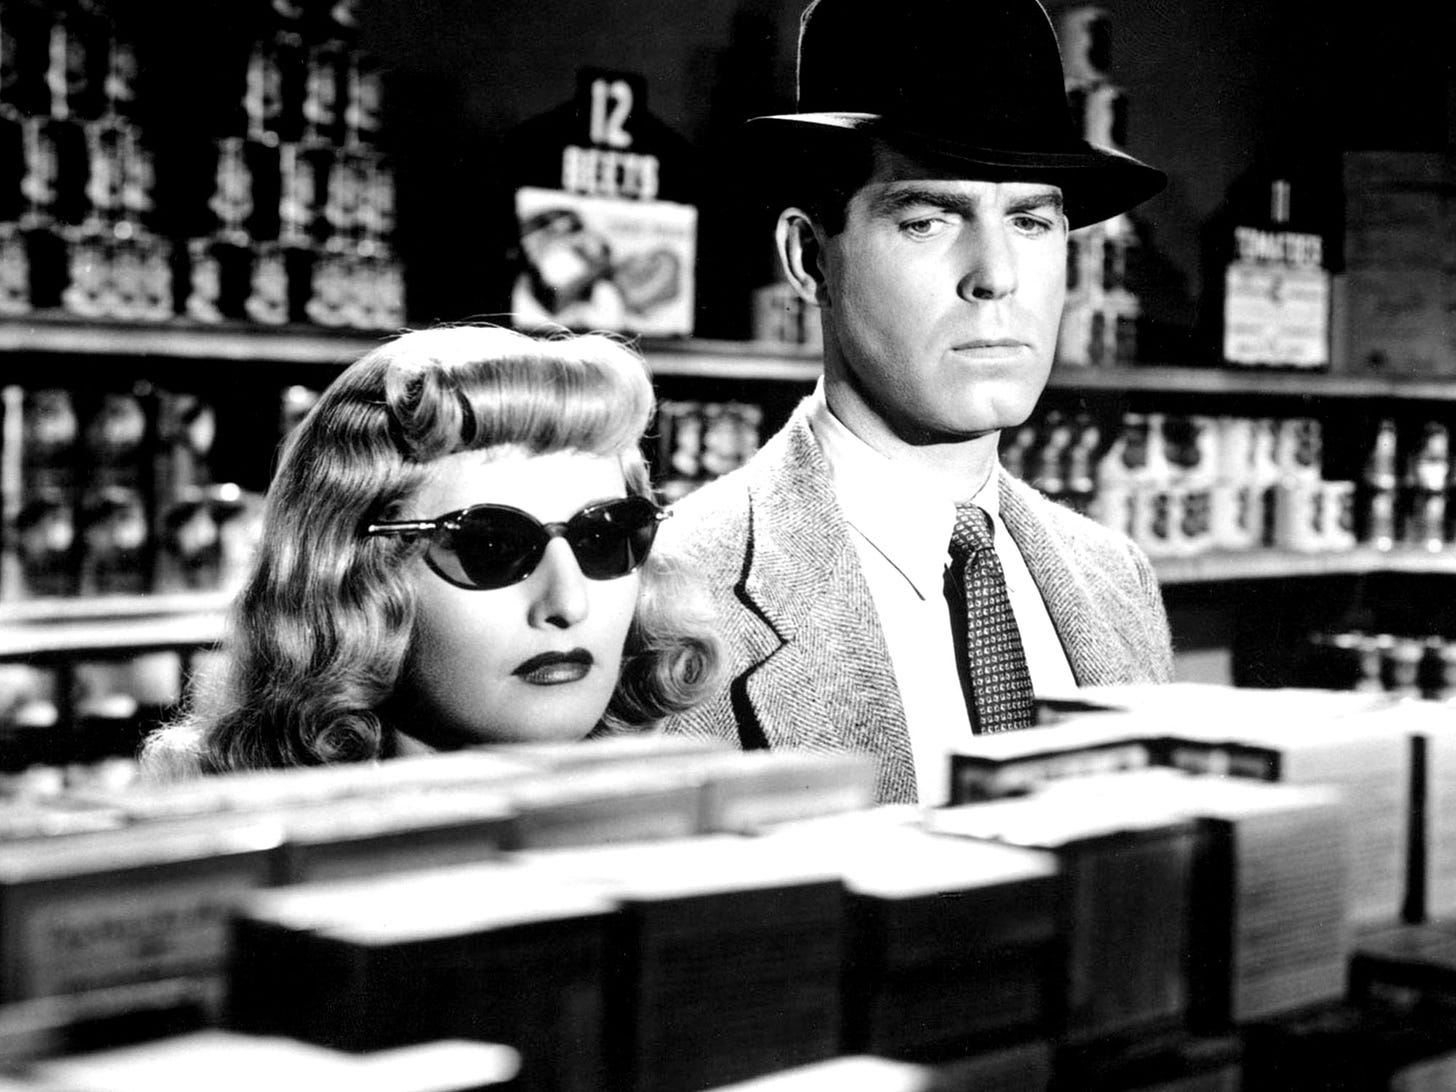 Barbara Stanwyck and Fred MacMurray in a supermarket in 1944 film noir Double Indemnity. Stanwyck is wearing dark glasses and we only see her head above the supermarket shelving. MacMurray is wearing a black fedora, a soft tweed blazer and a check tie. They both look suspicious. They are plotting a murder